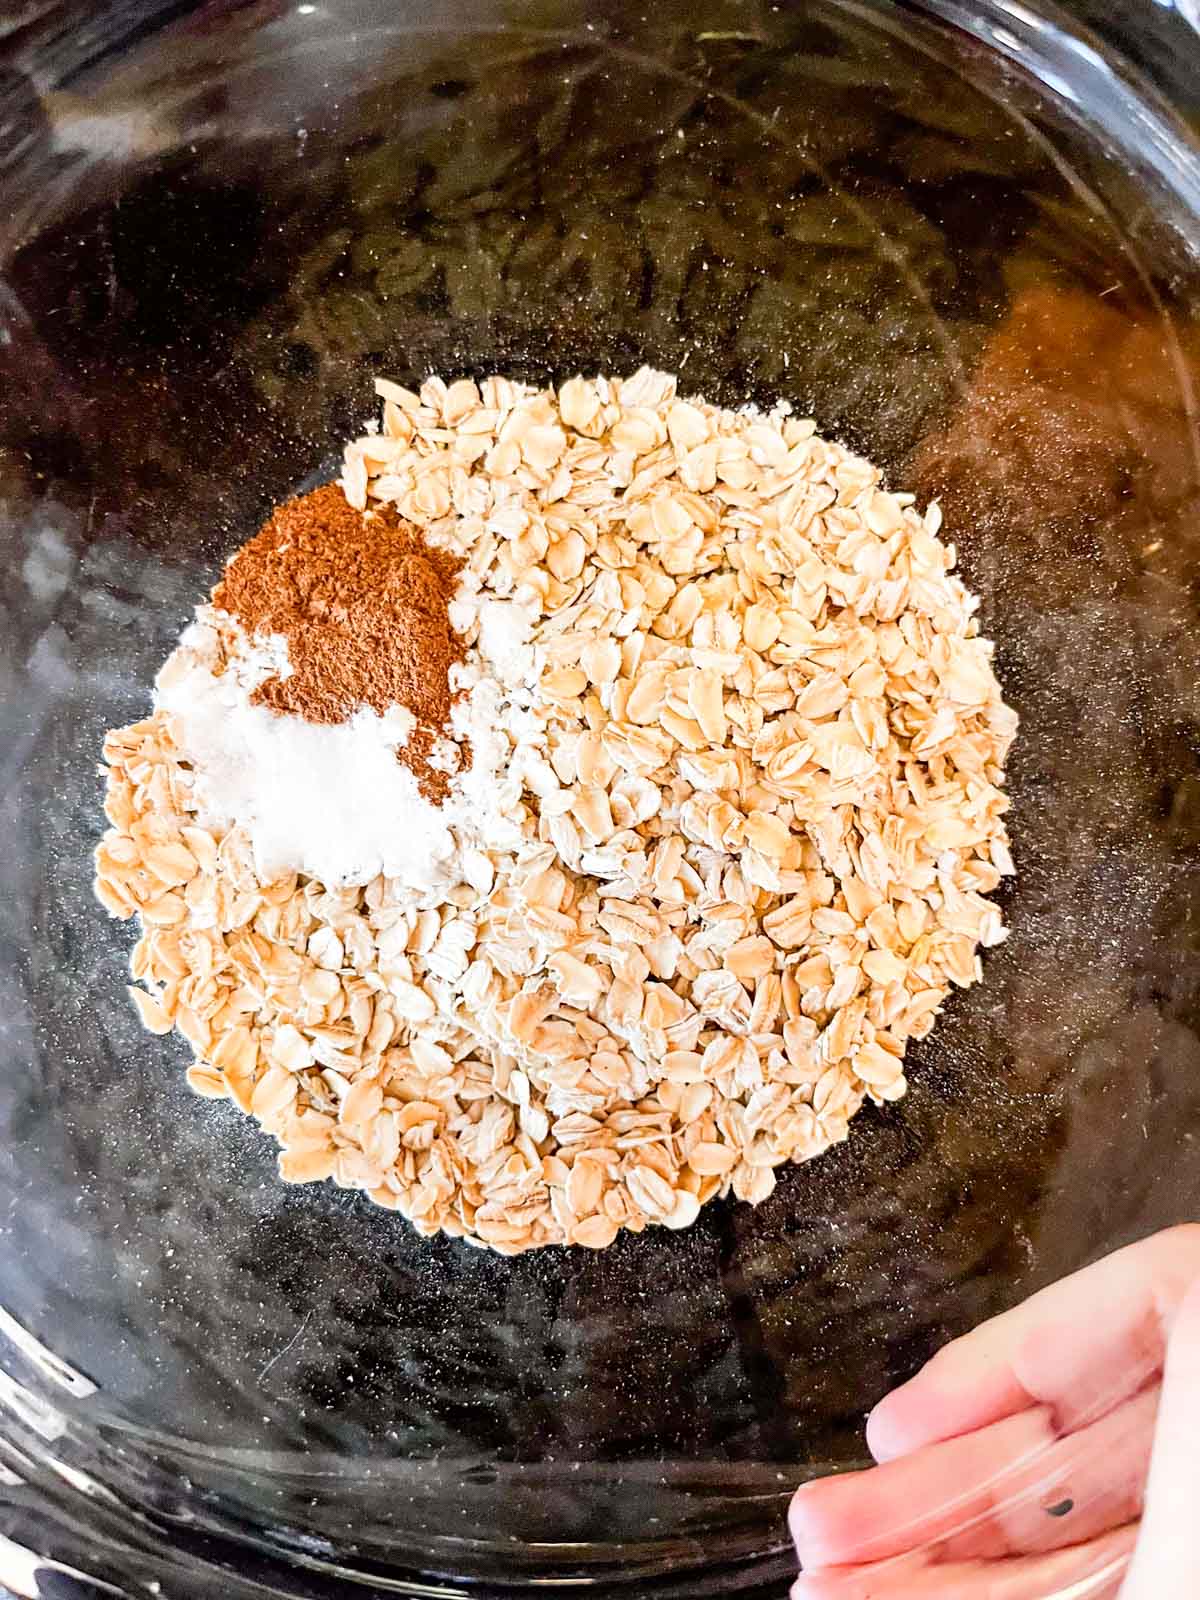 Oats and other dry ingredients in a small bowl.